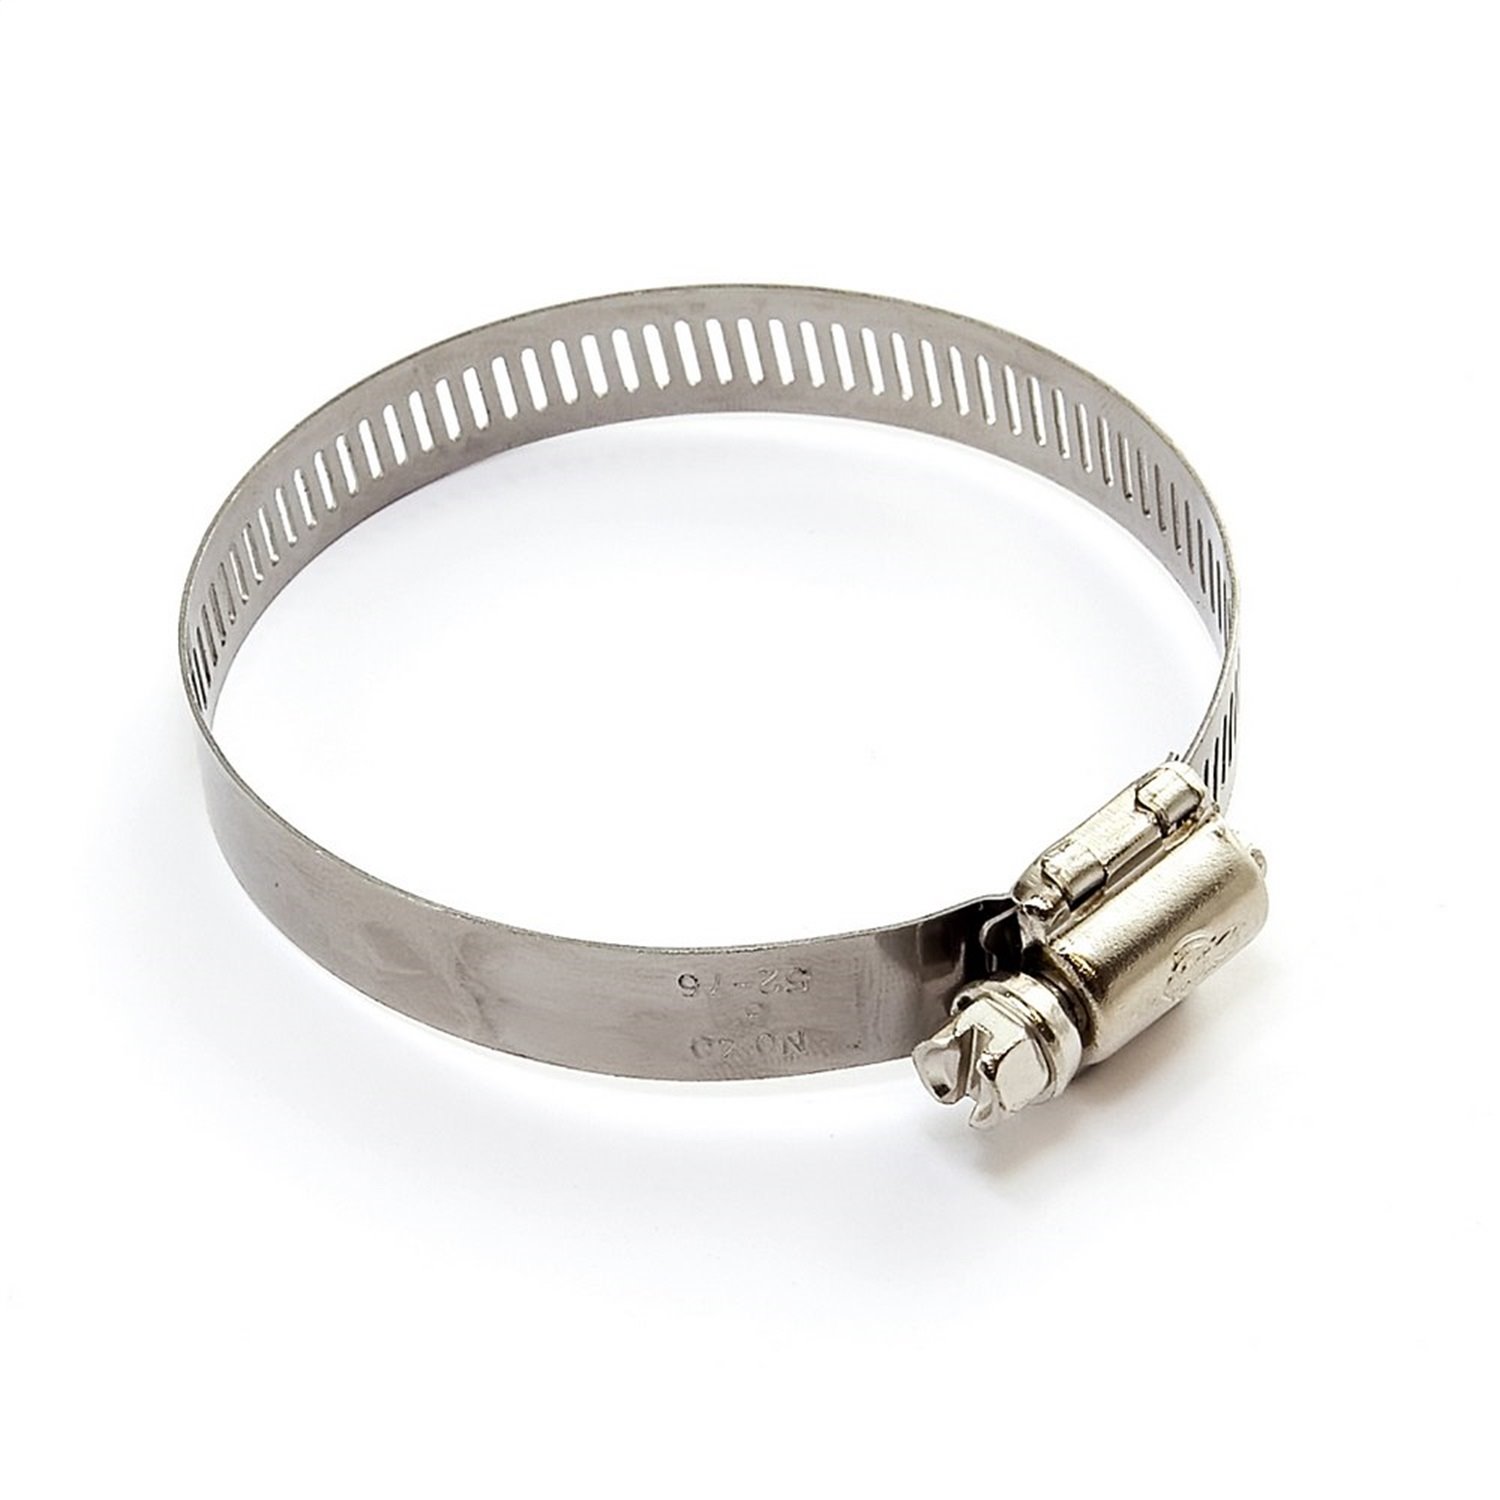 Hose Clamp 3 Inch By Omix-ADA